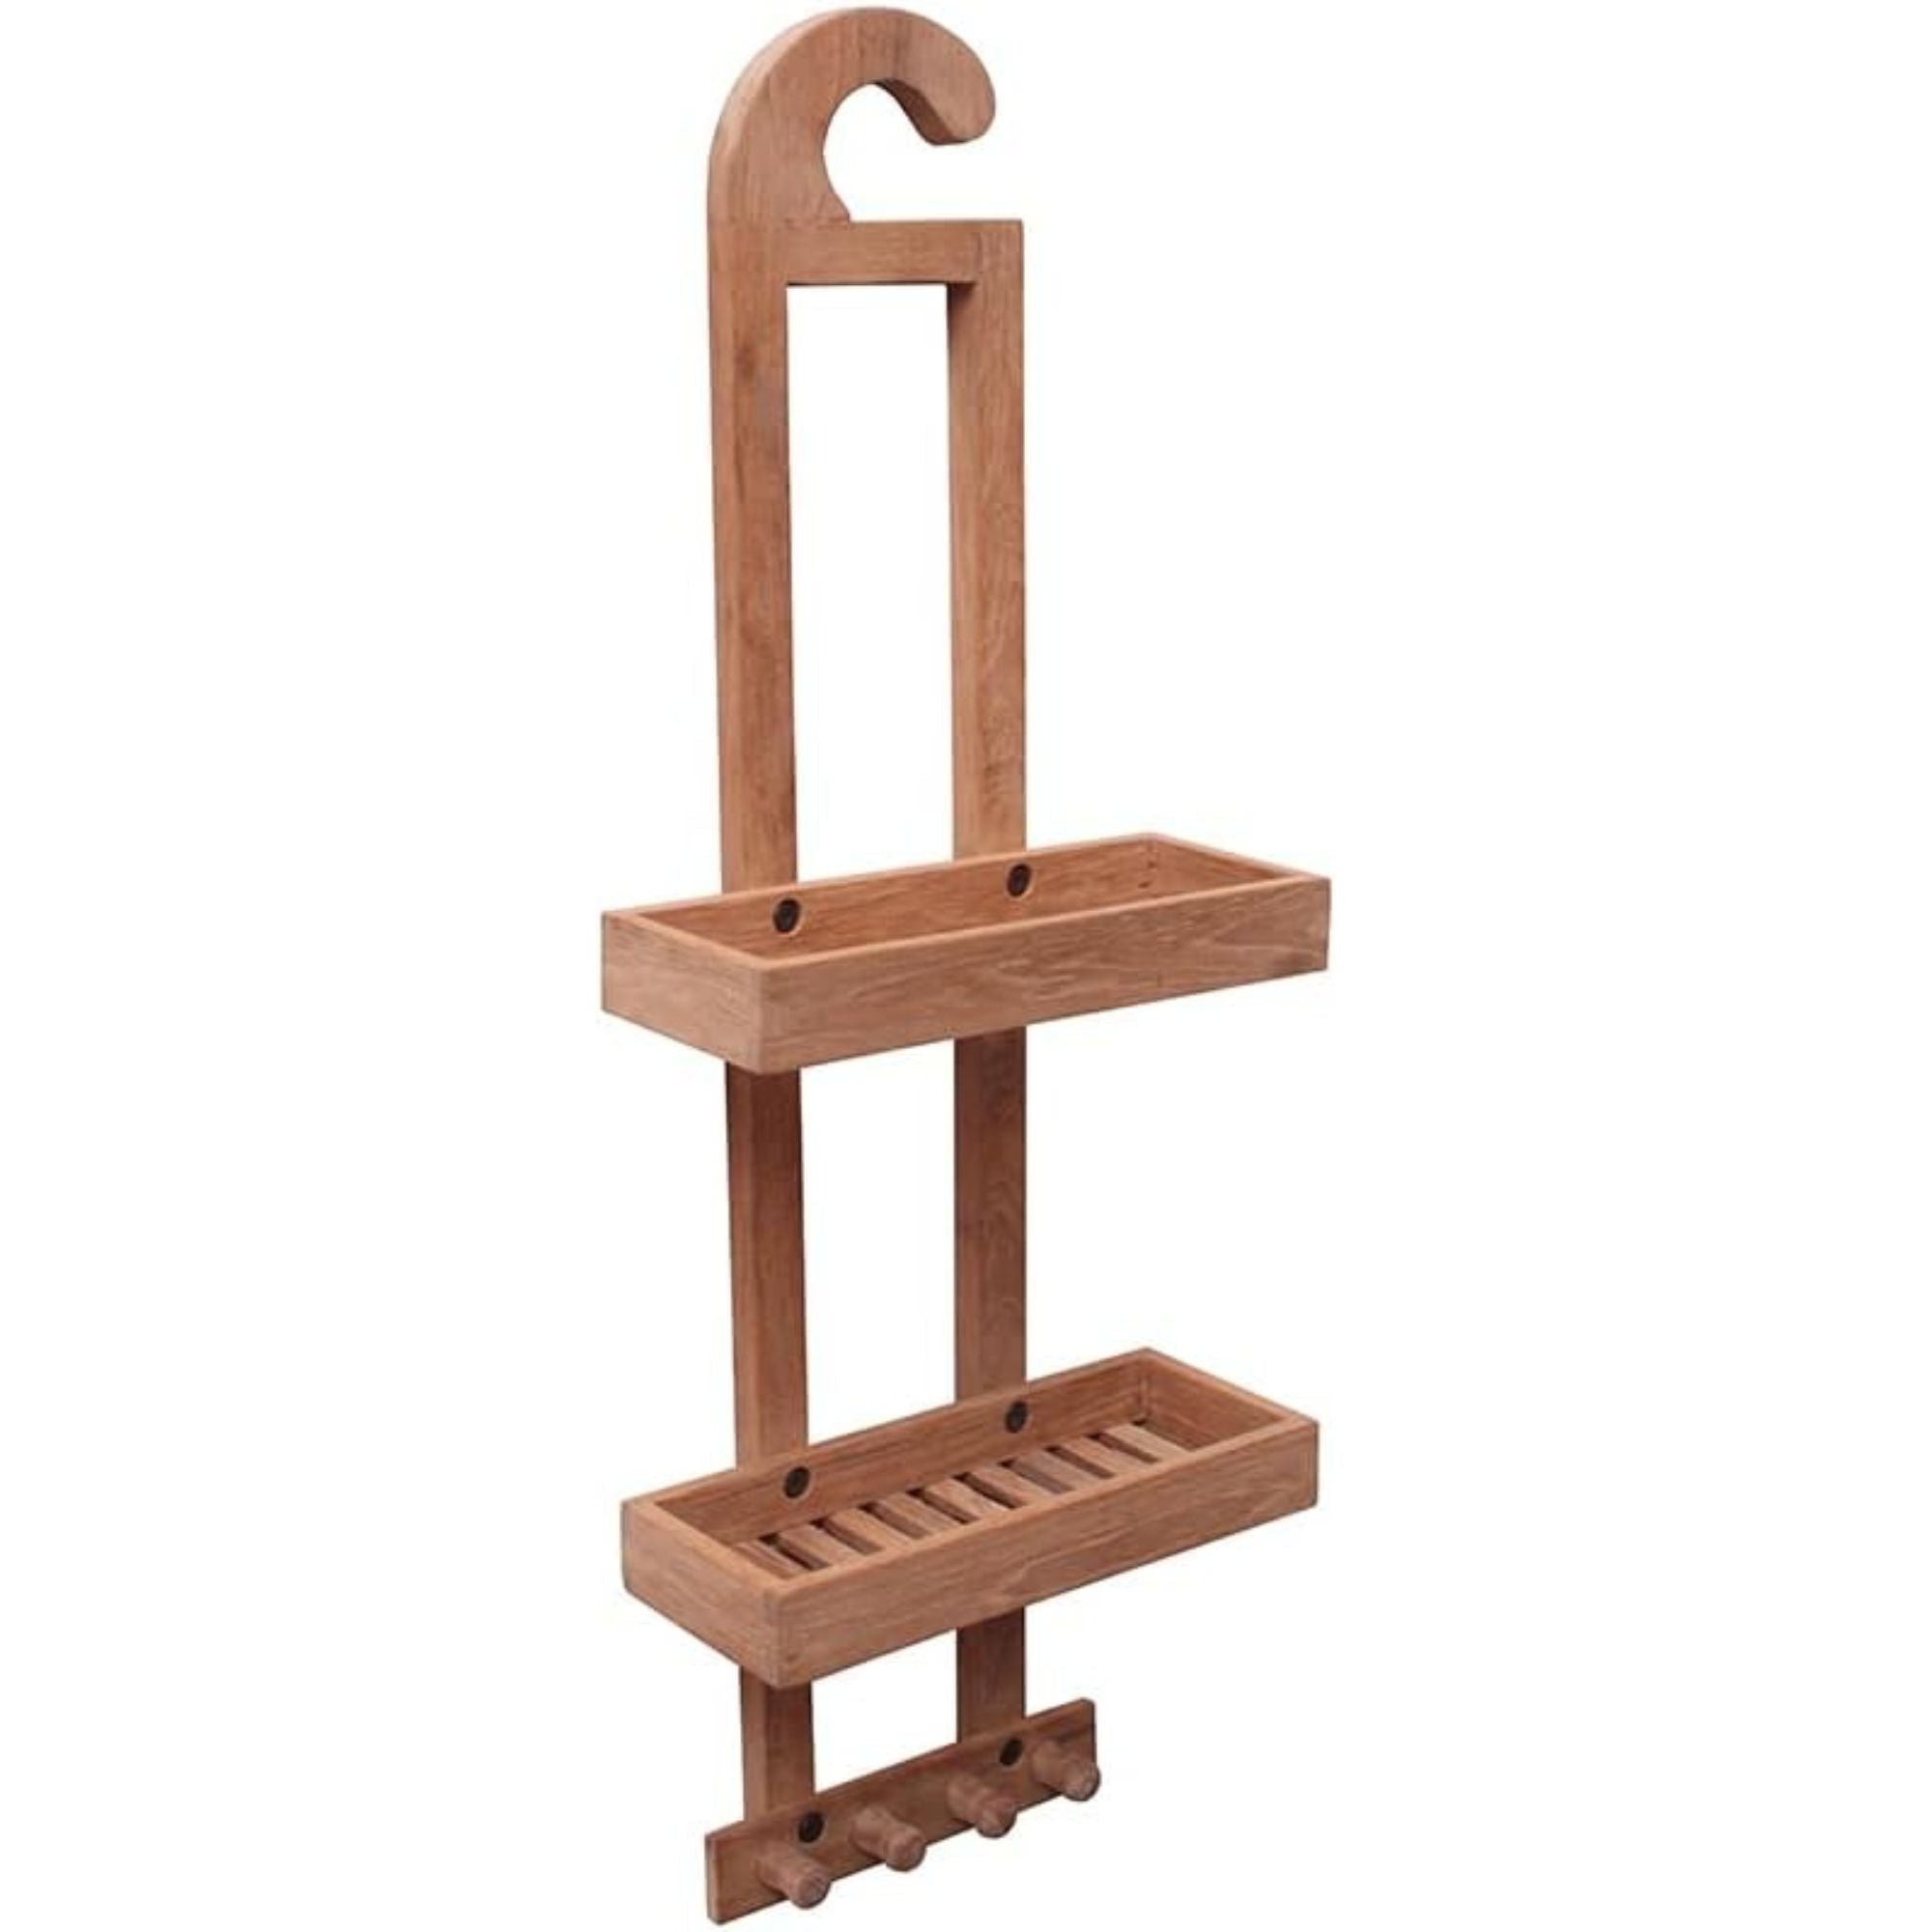 Carbone Natural Shower Caddy